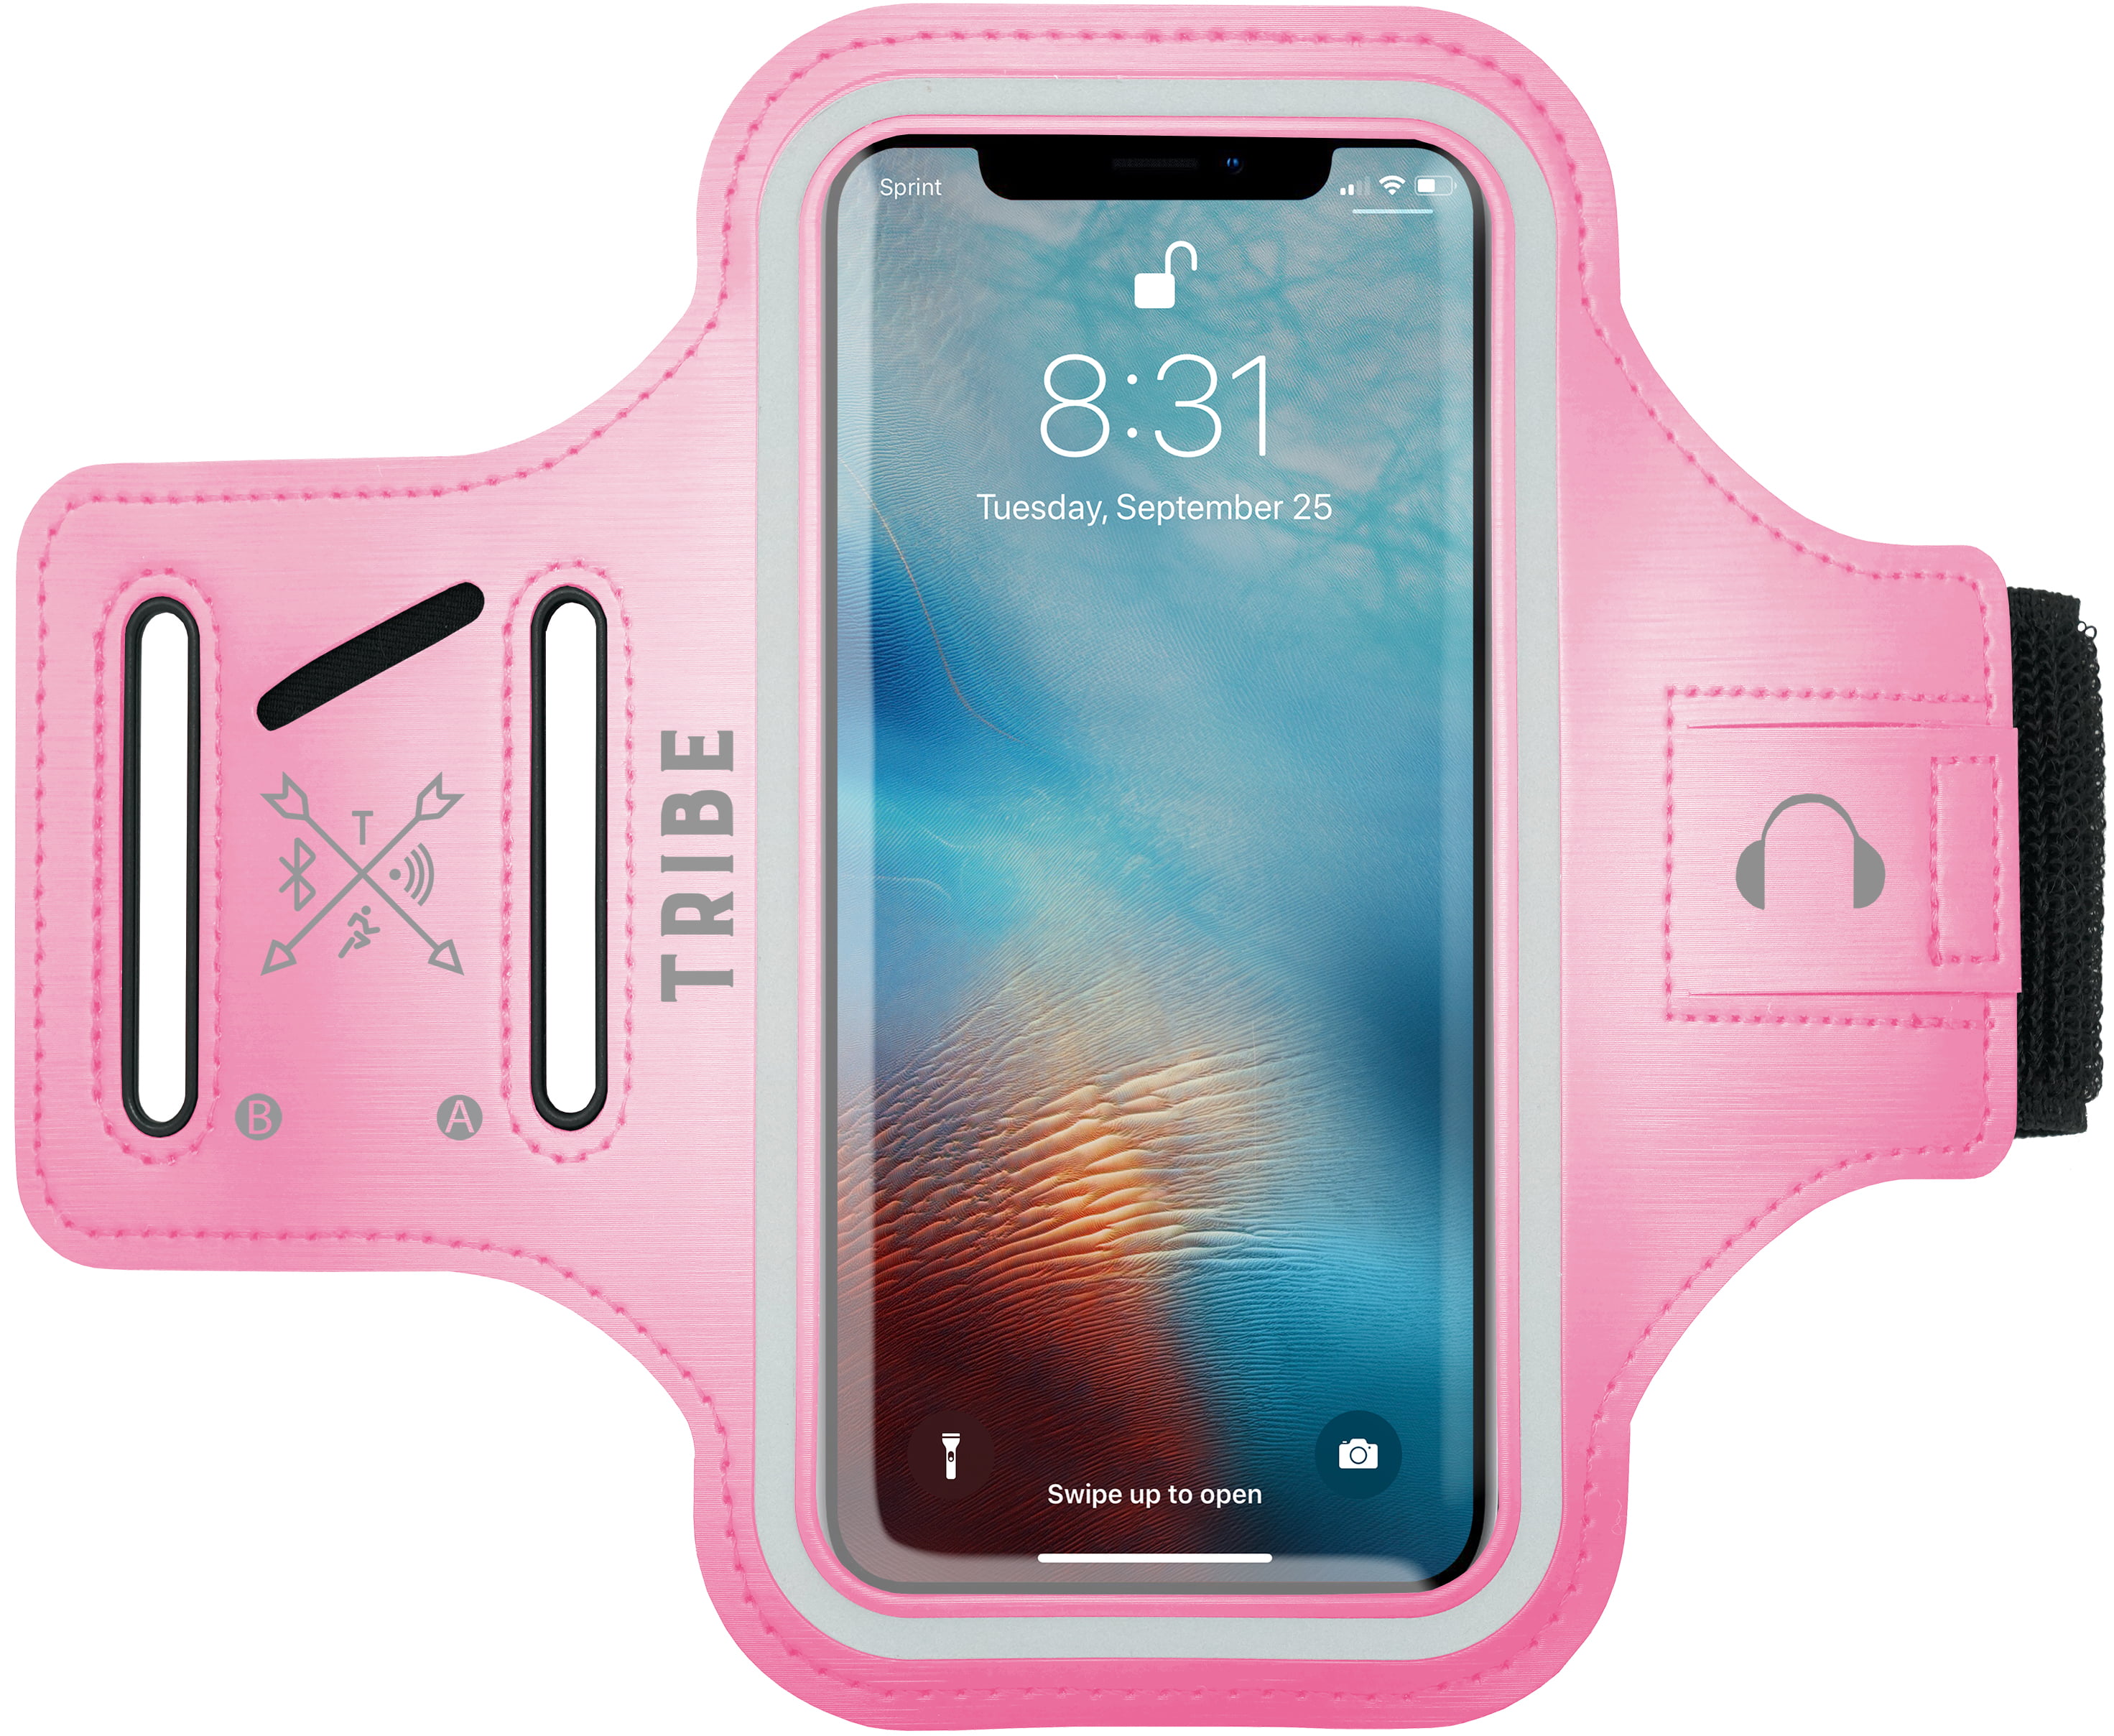 Xs Max Water Resistant Ideal Running Phone Holder XR ANJ Outdoors Elastic Lycra Running Armband for iPhone Xs Galaxy Phones Large Capacity Upper Arm Band to Hold Money Cards and Keys